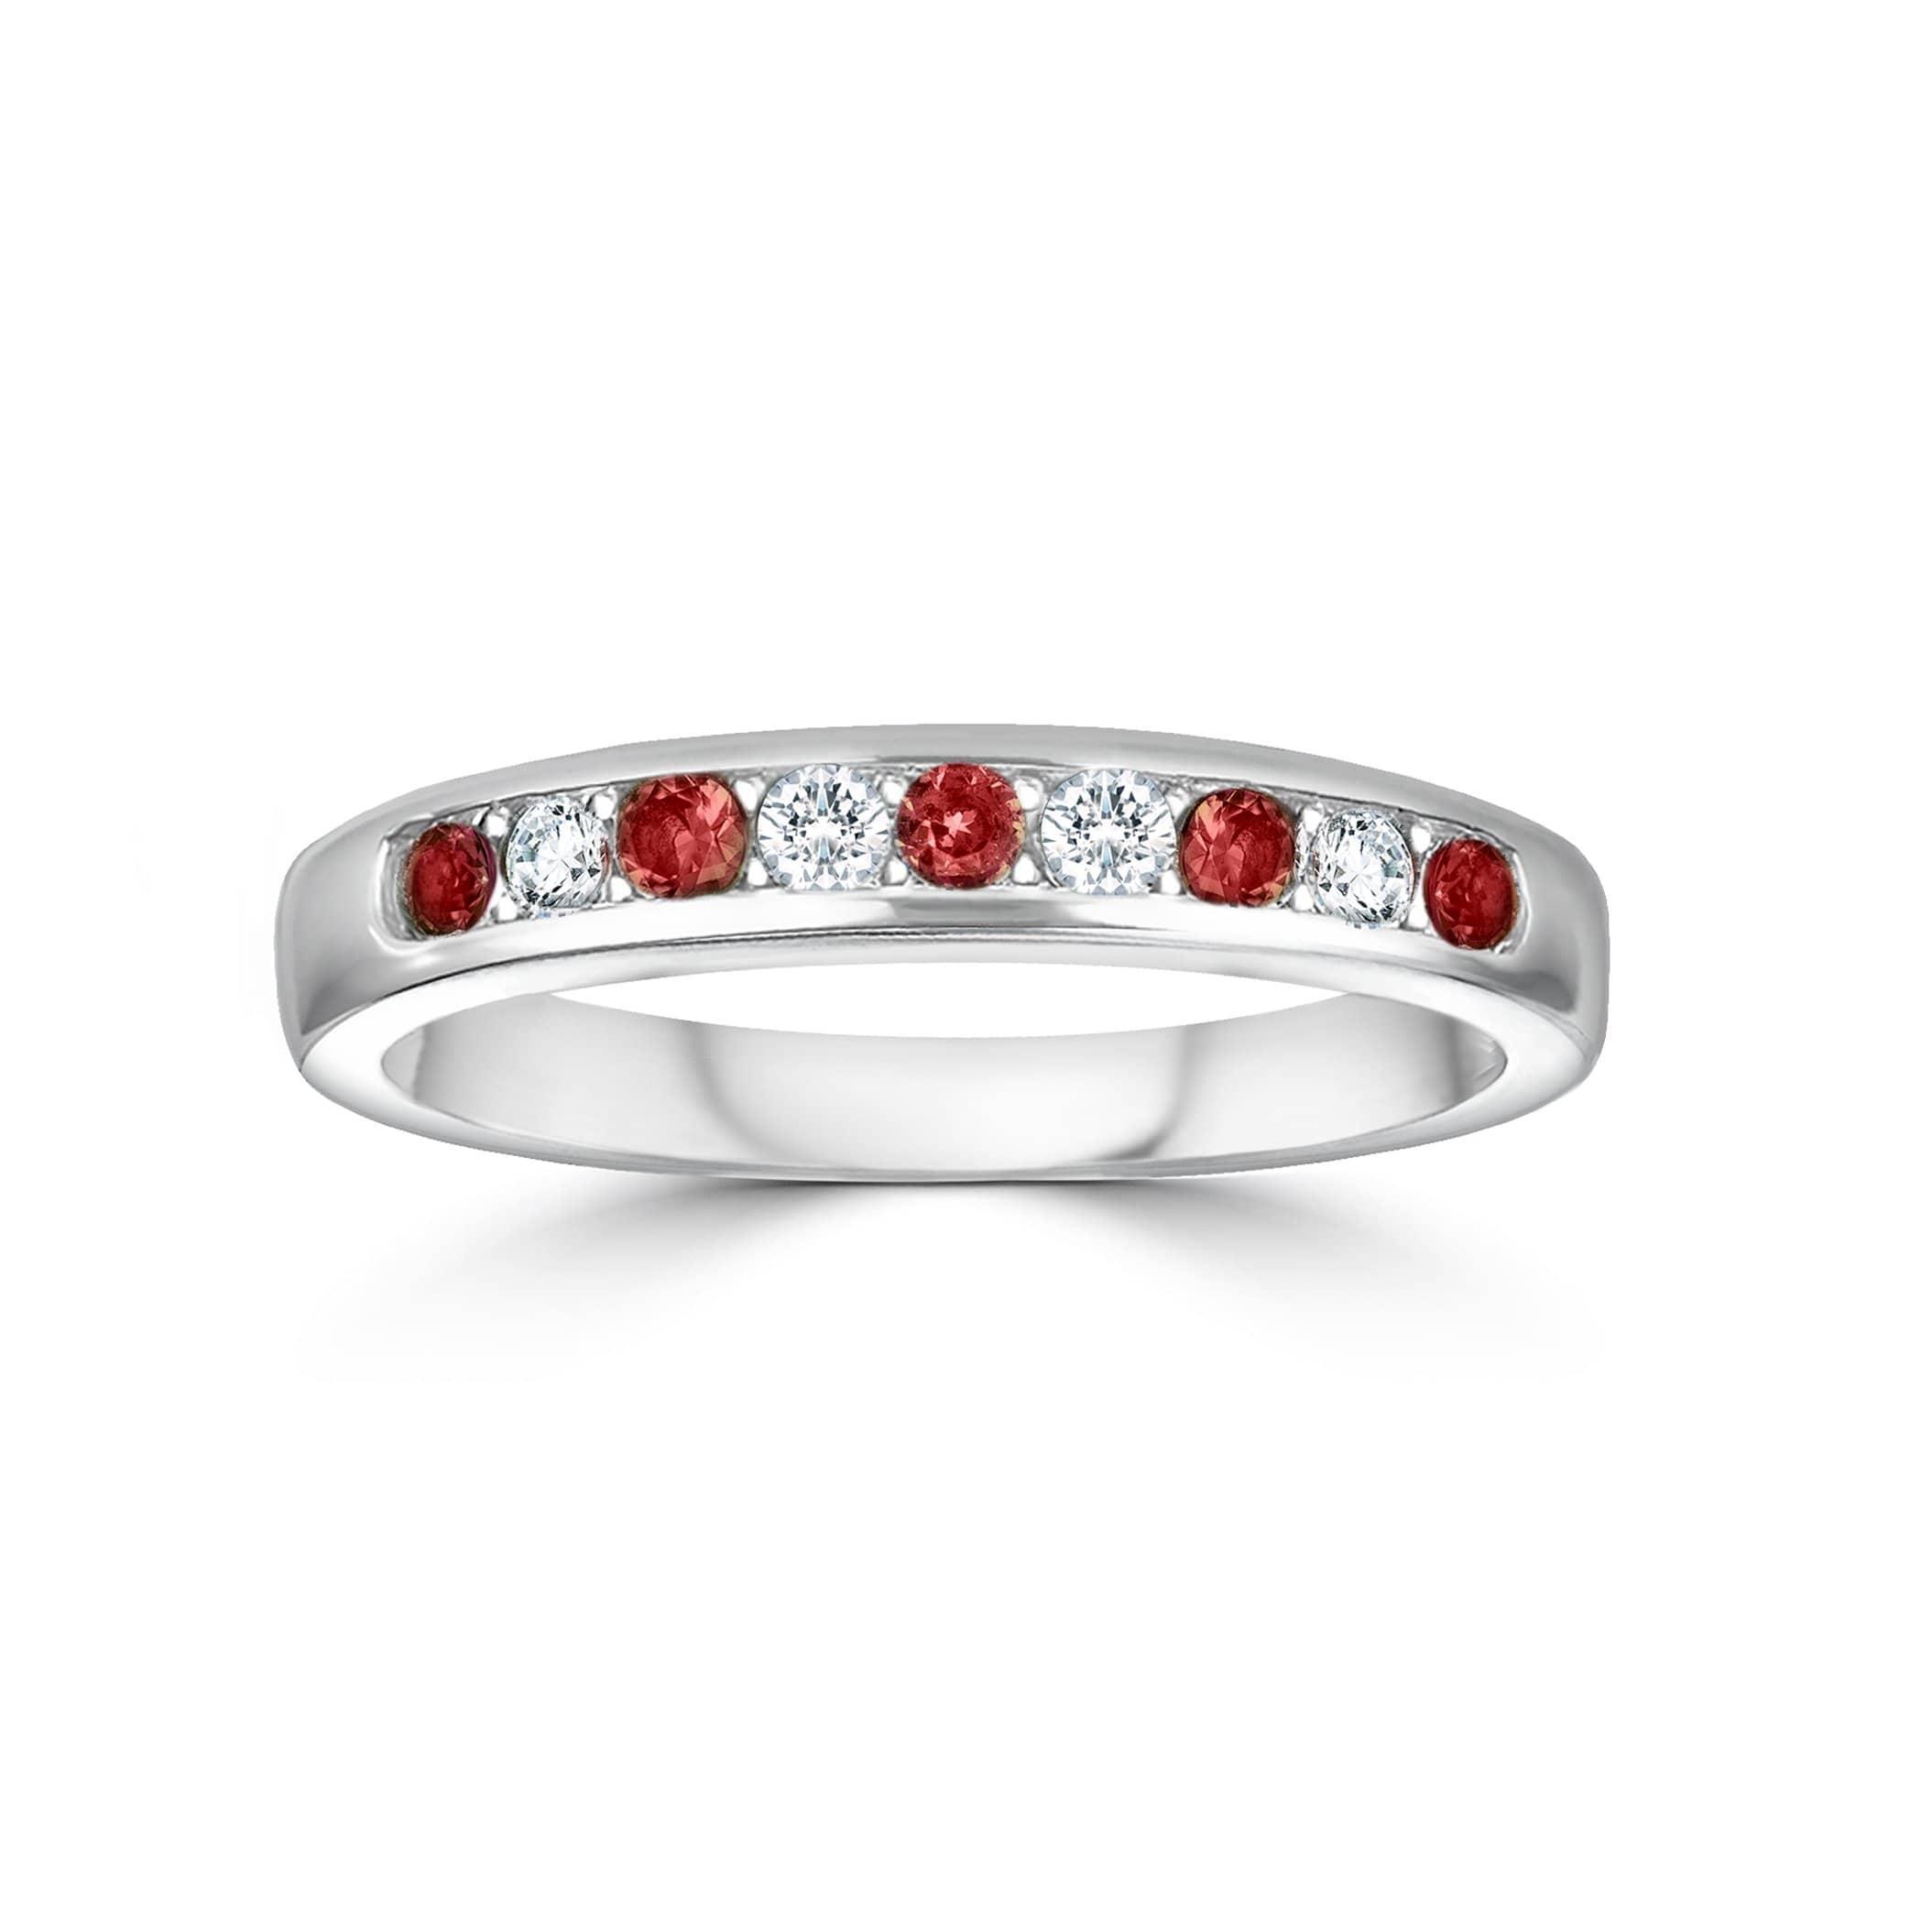 Lynora Jewellery Ring Opulence Channel Set Ring Sterling Silver & Ruby Stone